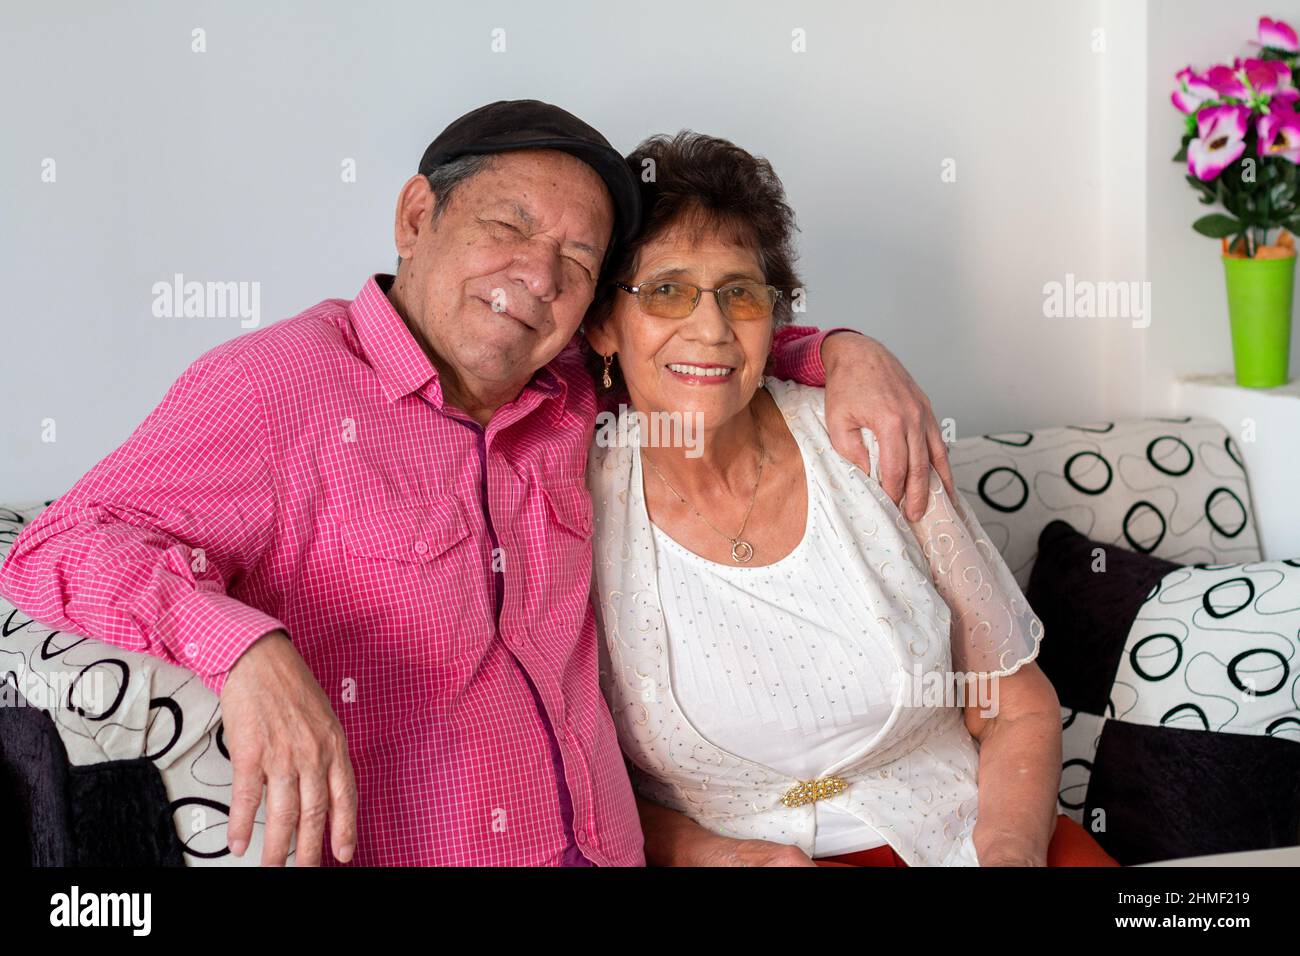 Couple of happy grandparents hugging each other enjoying their retirement. Couple of latin grandparents. Stock Photo